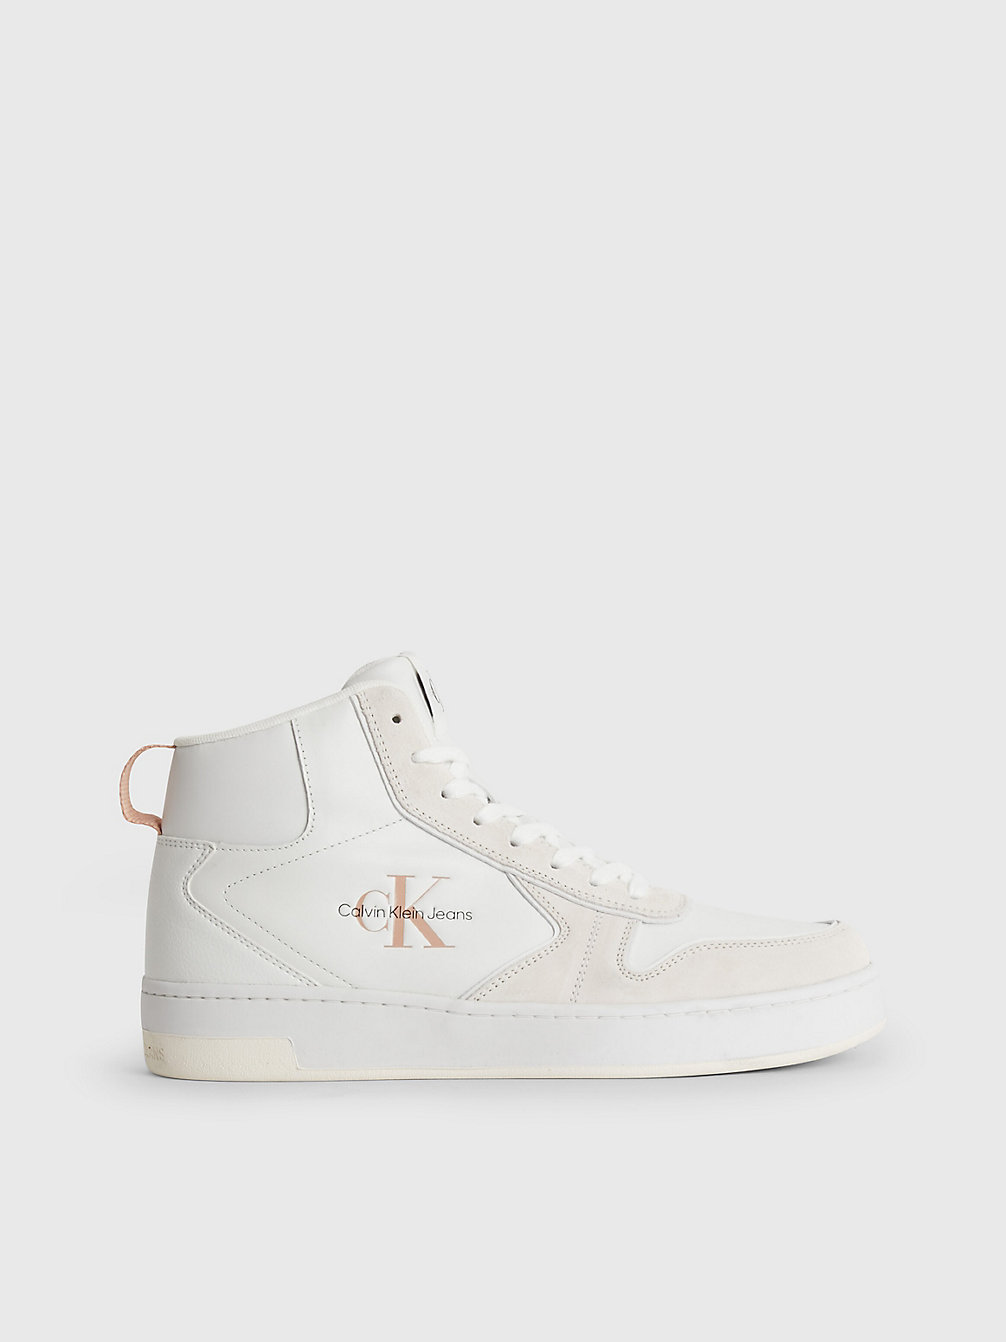 WHITE/ANCIENT WHITE > Leren High-Top Sneakers > undefined dames - Calvin Klein